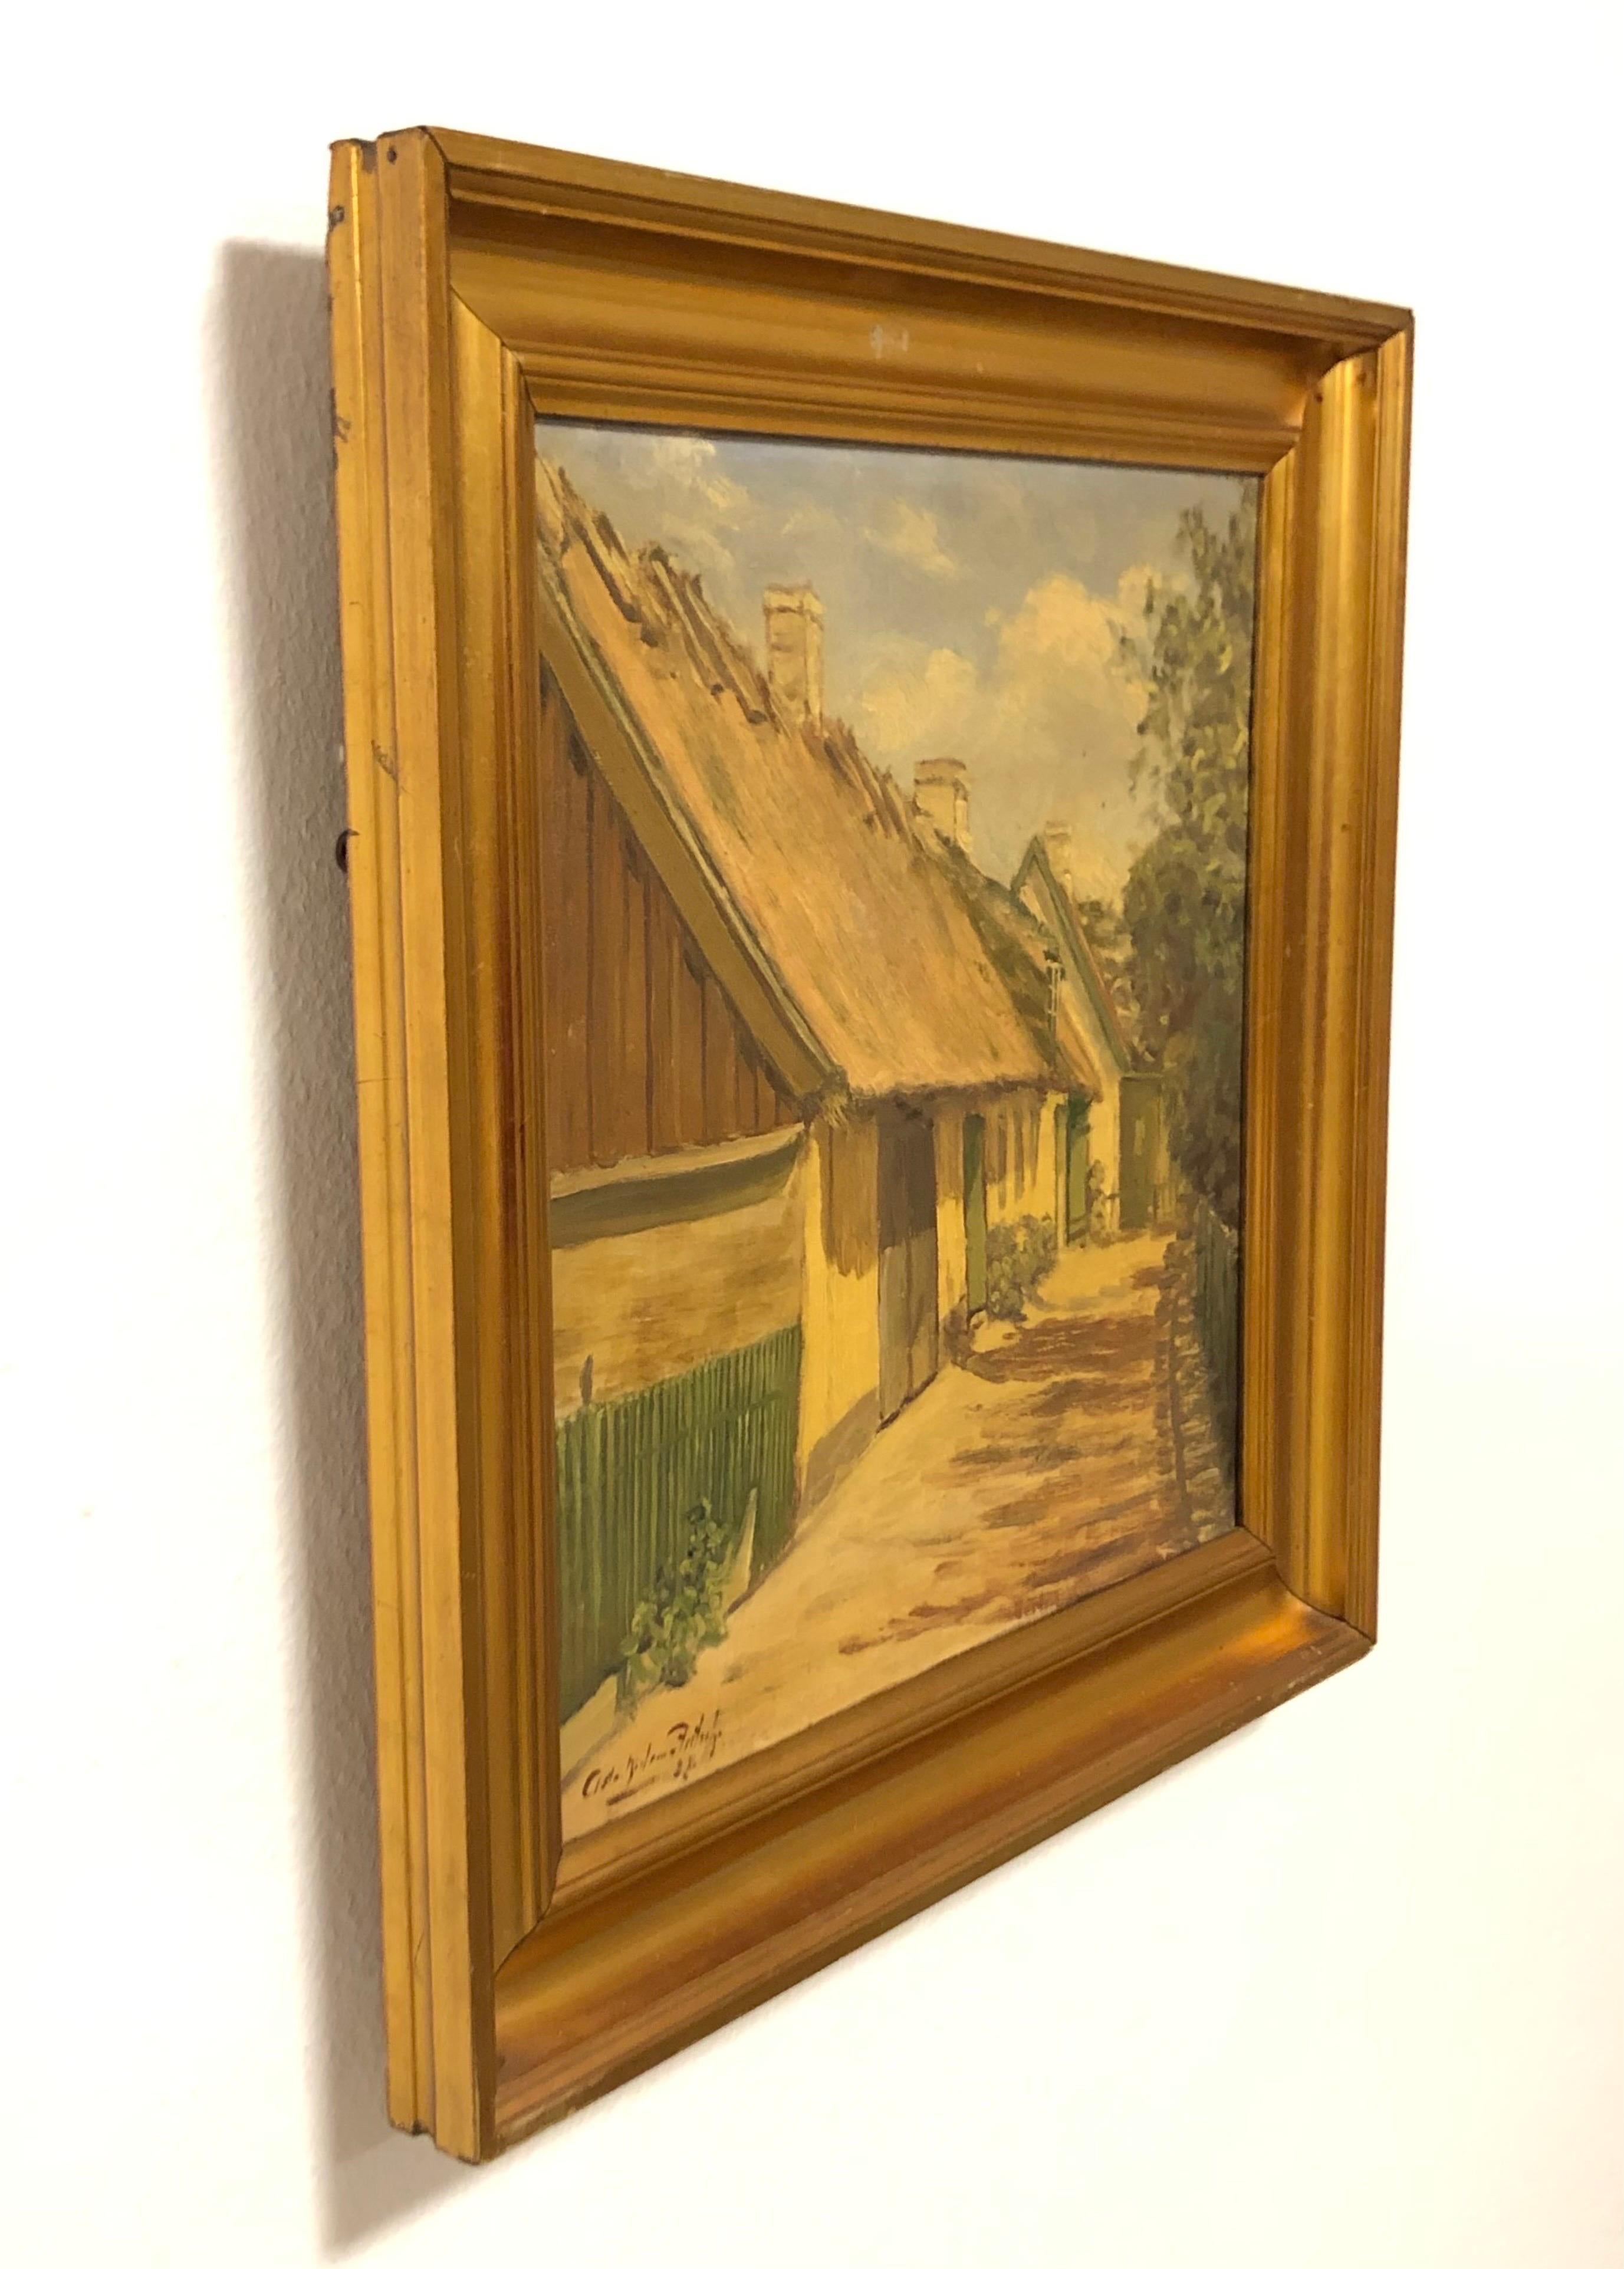 This is an exclusive original oil on canvas painting from 1928 by Asta Nielsen-Fritsch.
It is framed in a gold painted wooden frame and have a motive of houses in great details.

The painting is in good condition with wear according to its age. A